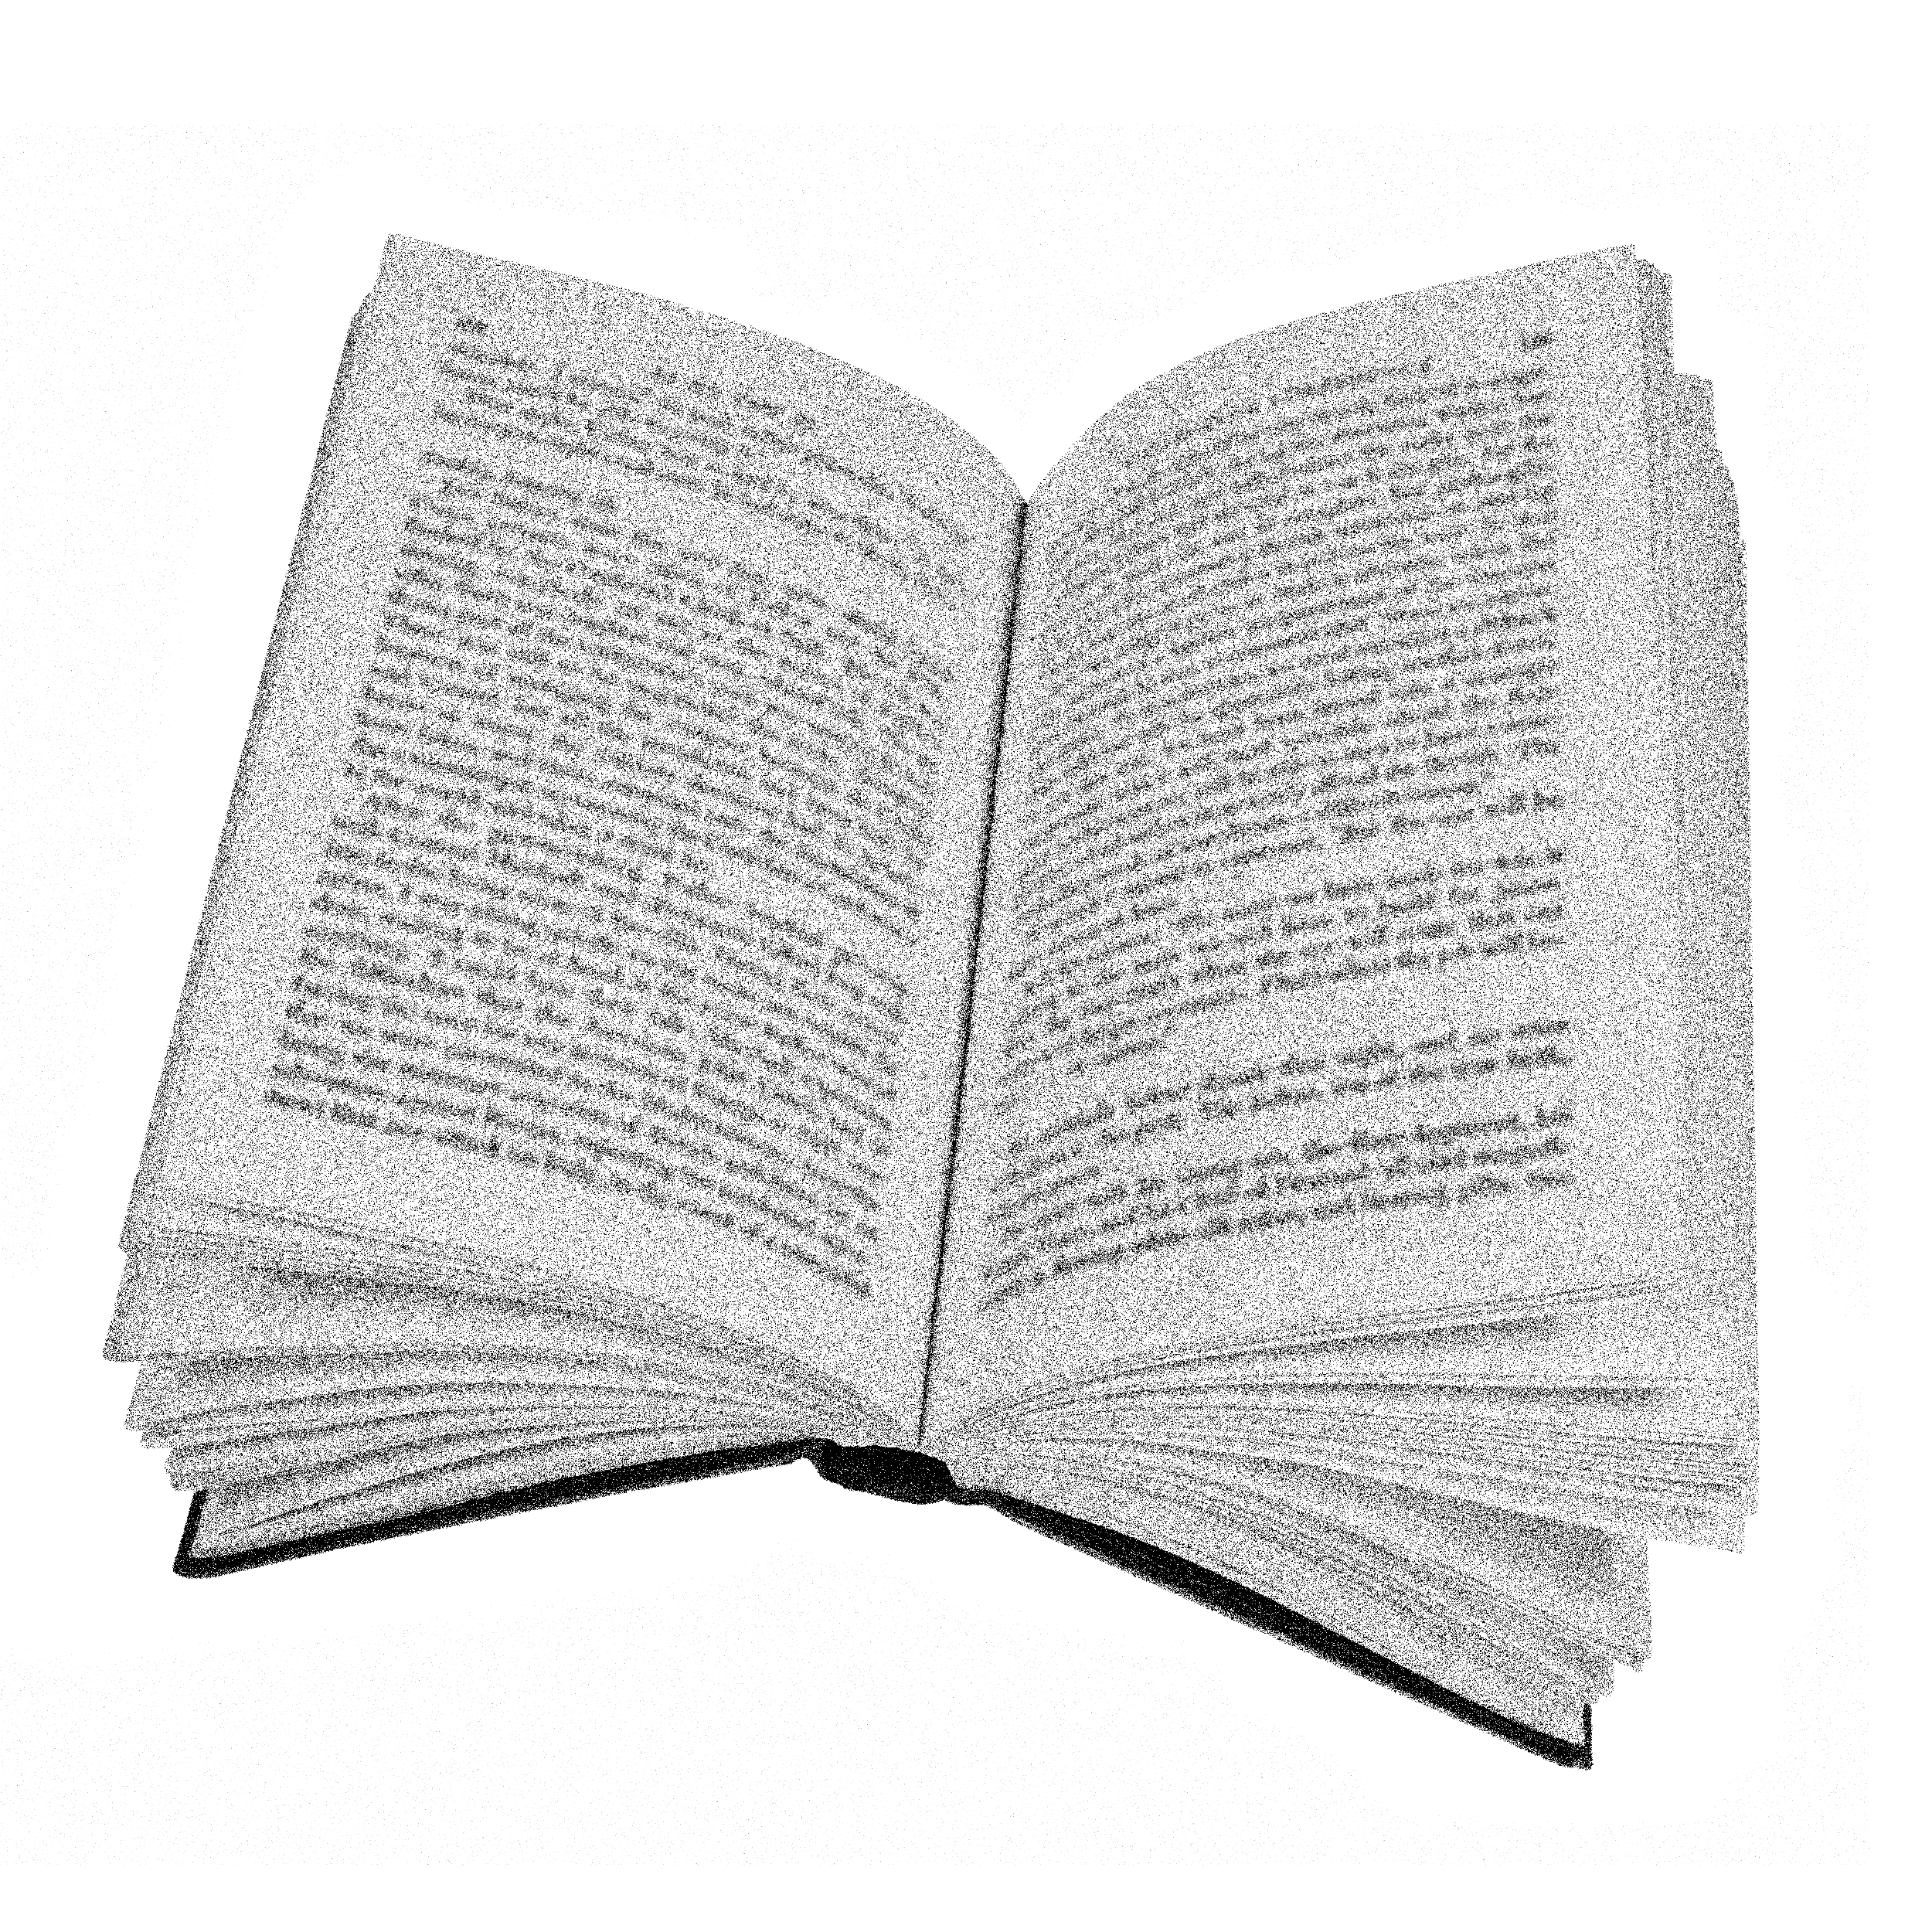 illustration of an open book.